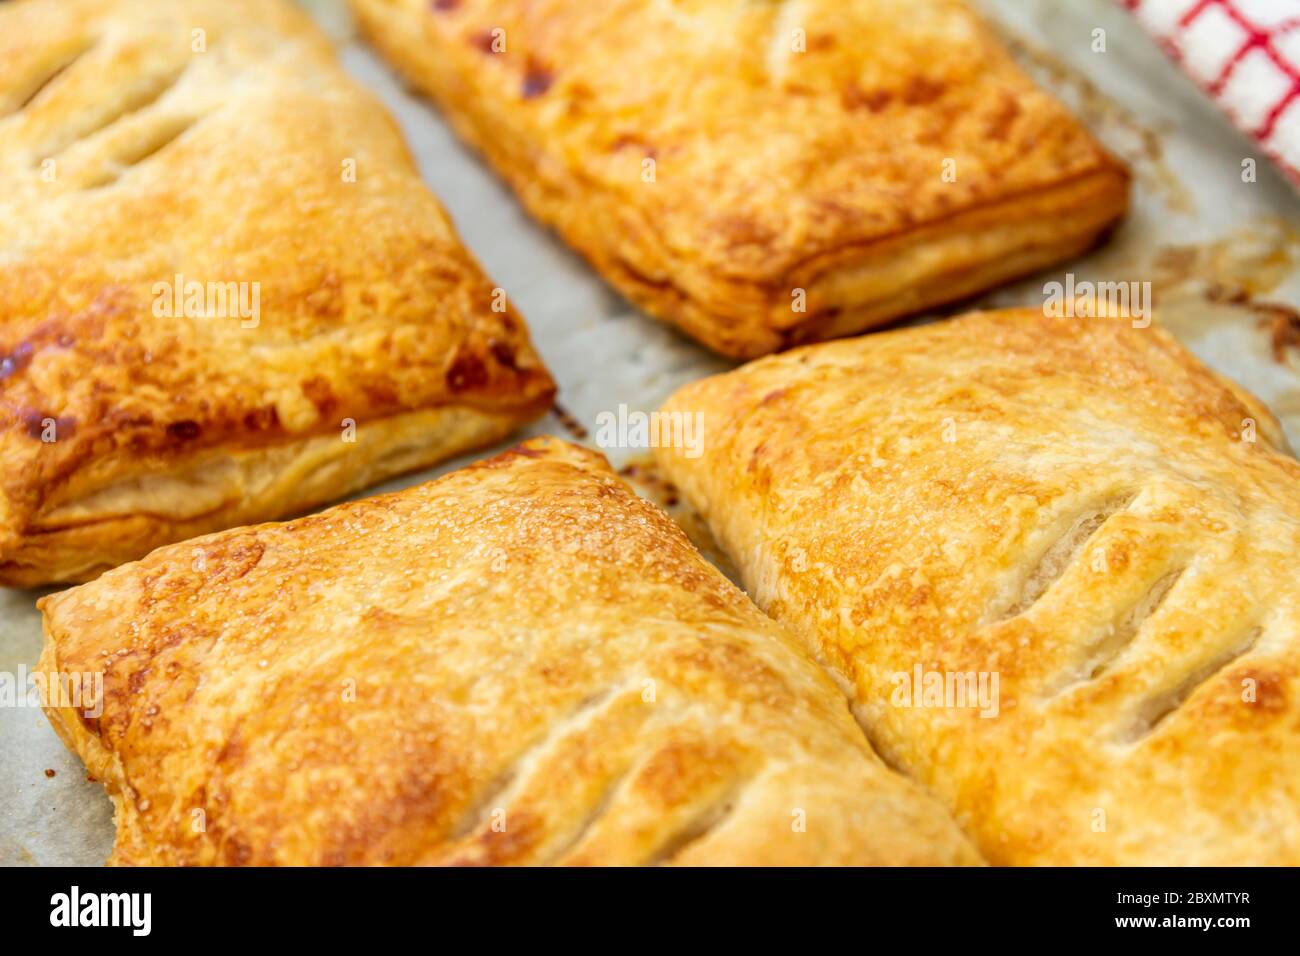 Four Apple Pies on a baking tray straight out of the oven Stock Photo